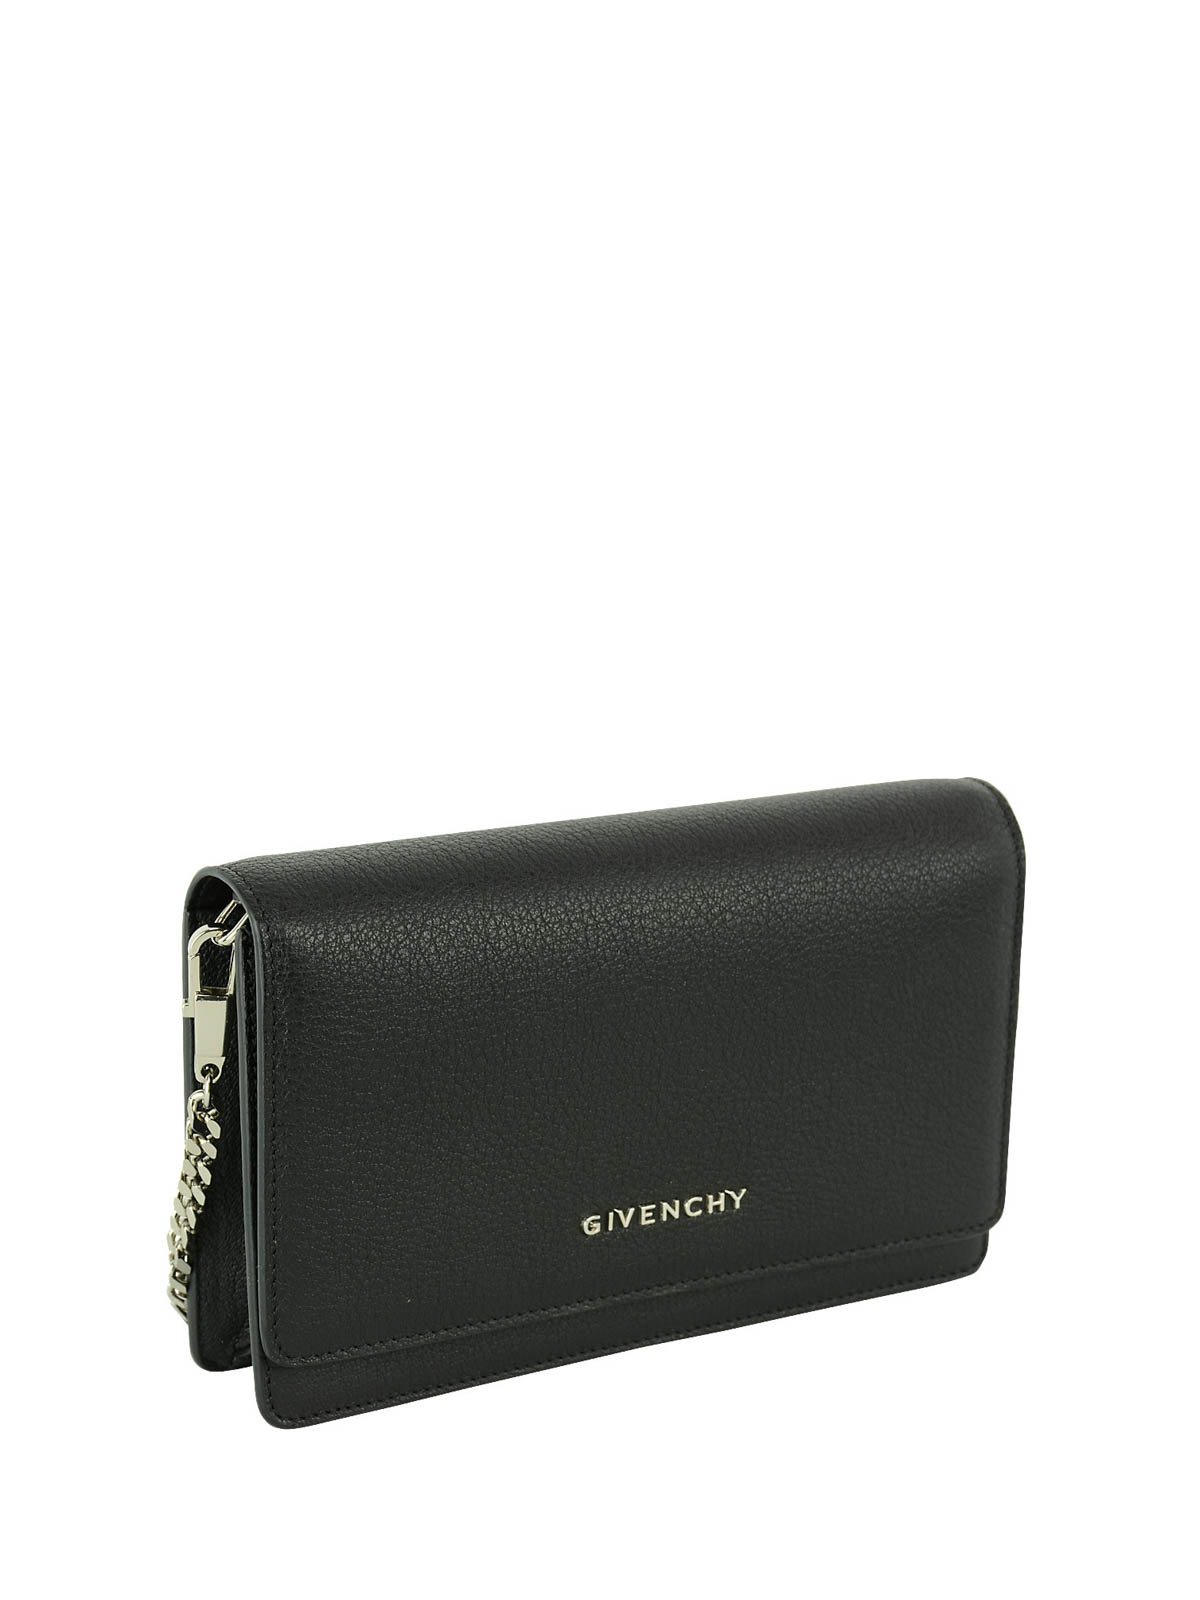 givenchy pandora wallet on chain